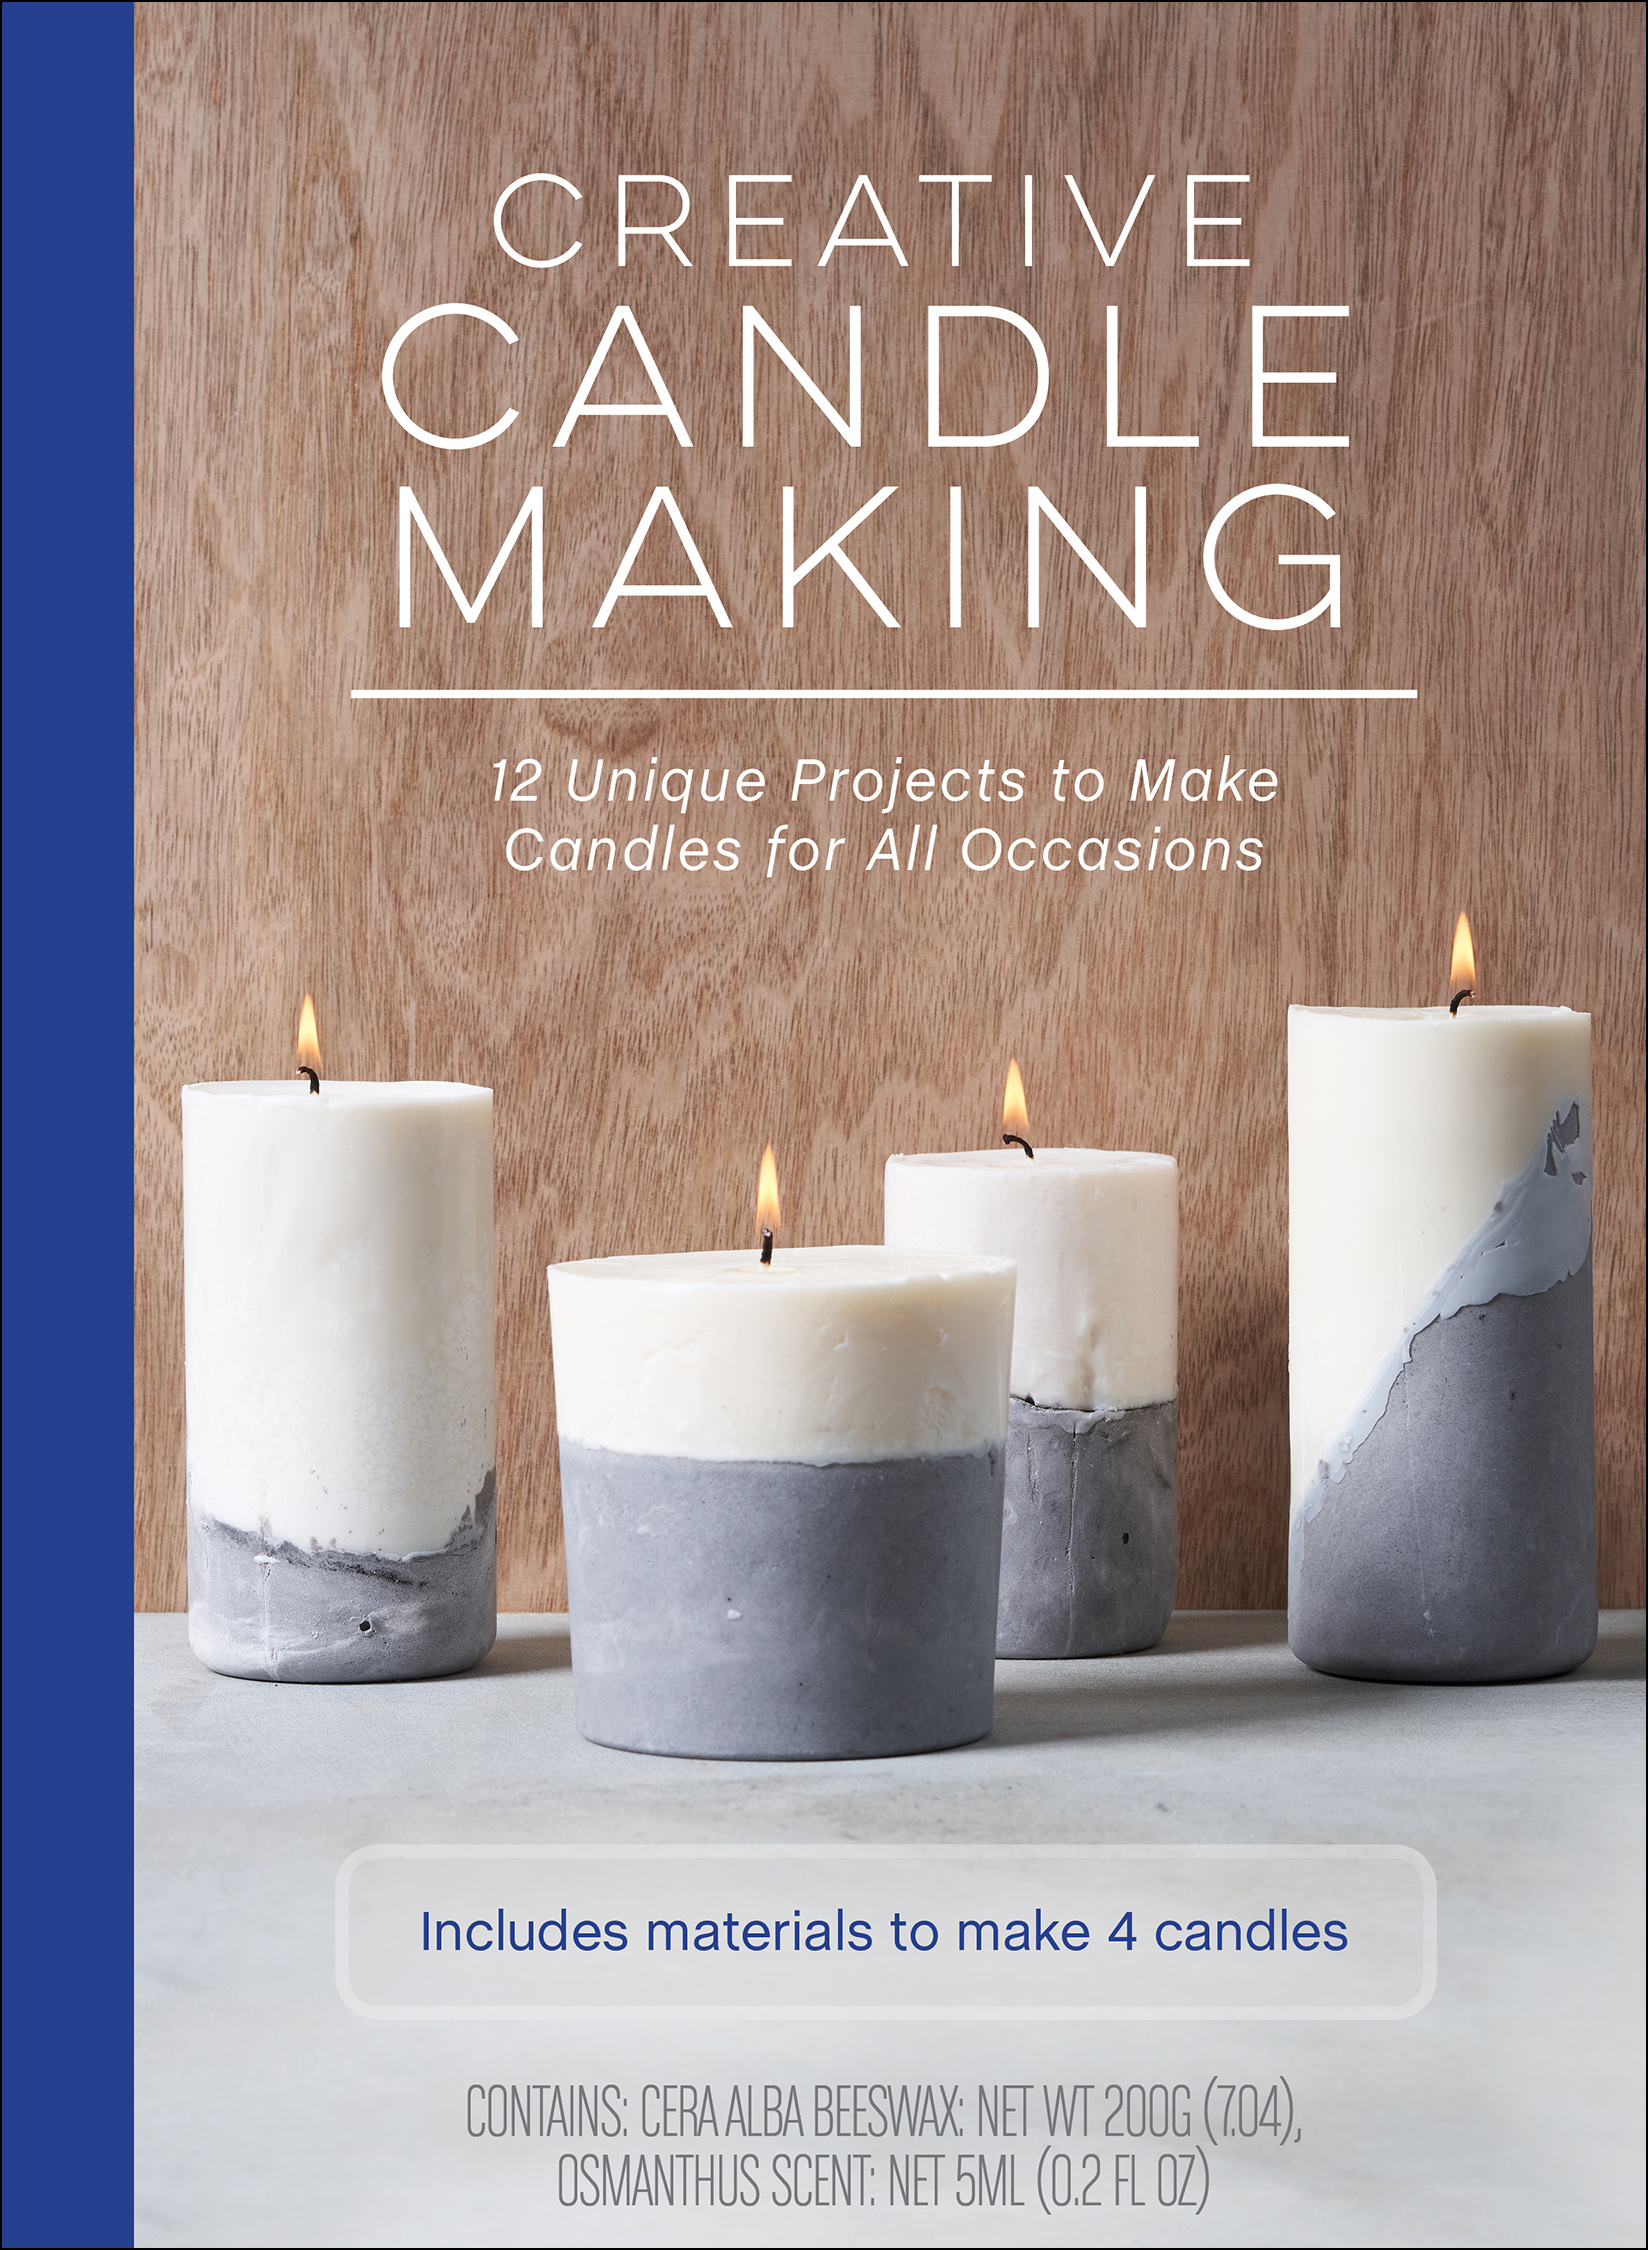 Link to Creative Candle Making by Mennitt in the catalog